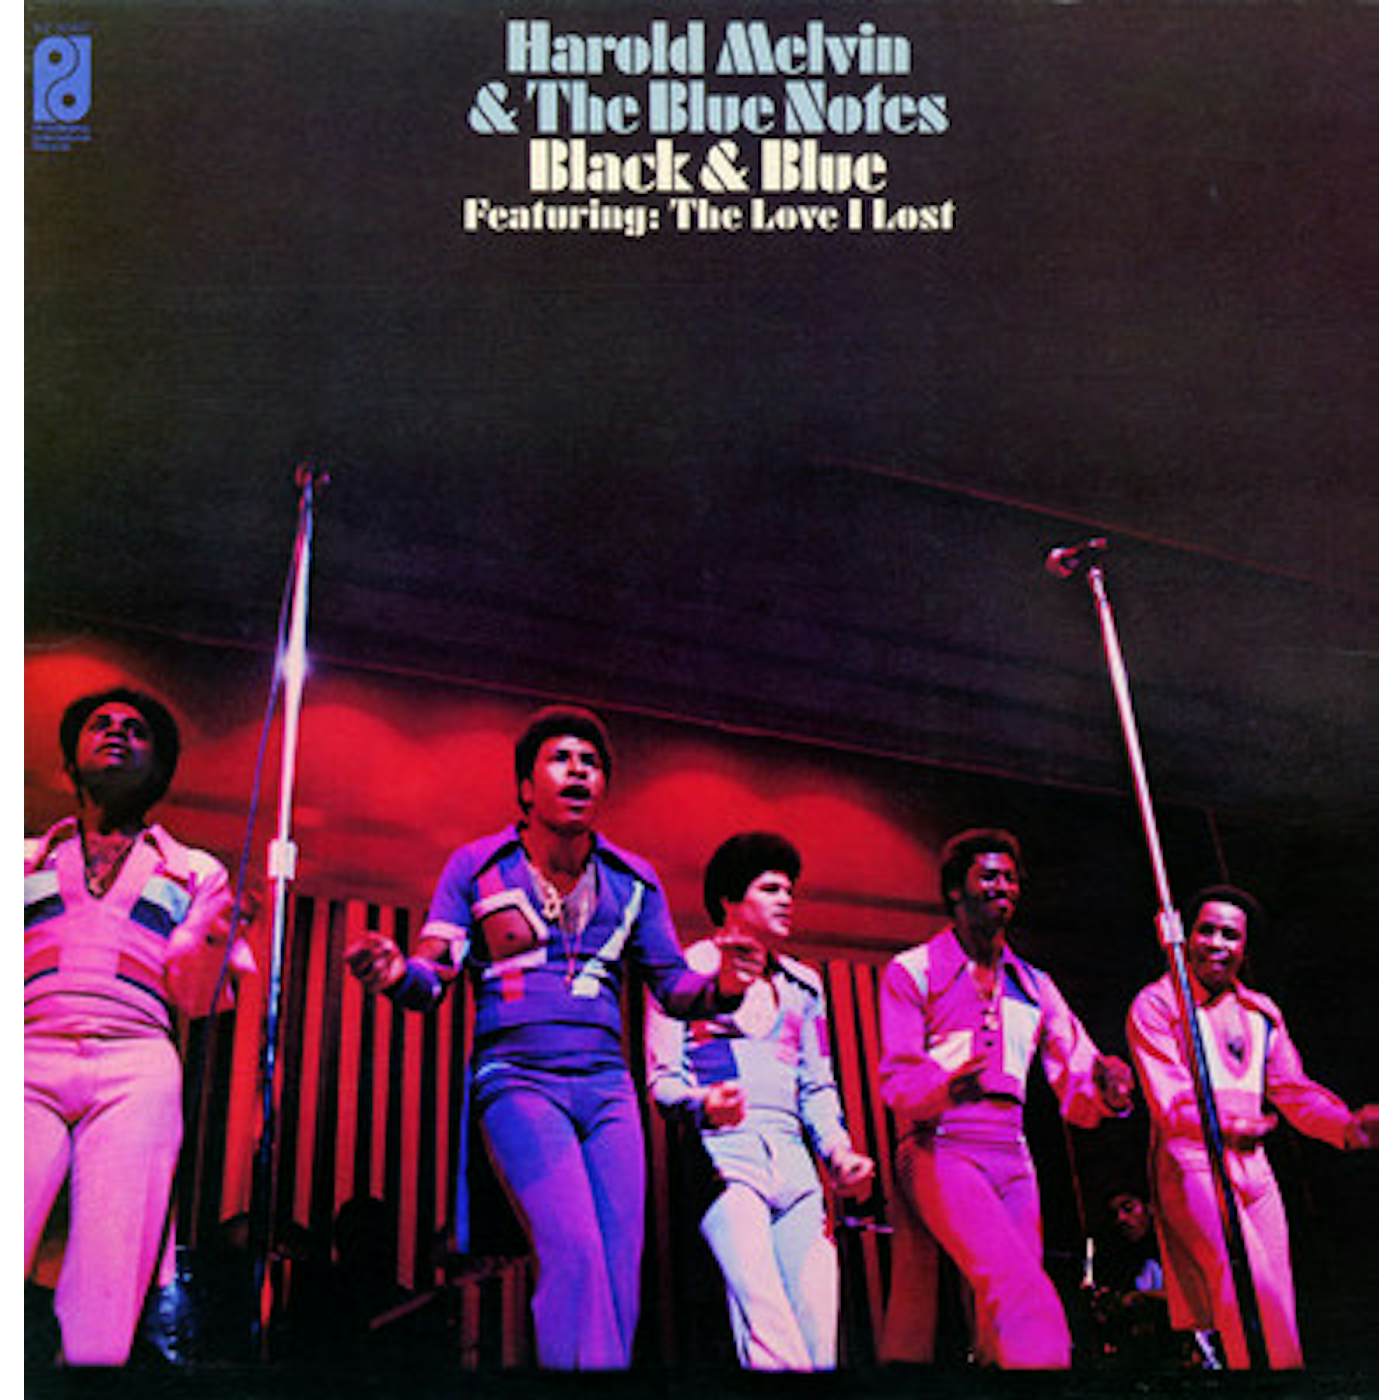 Harold Melvin & The Blue Notes BLACK AND BLUE CD